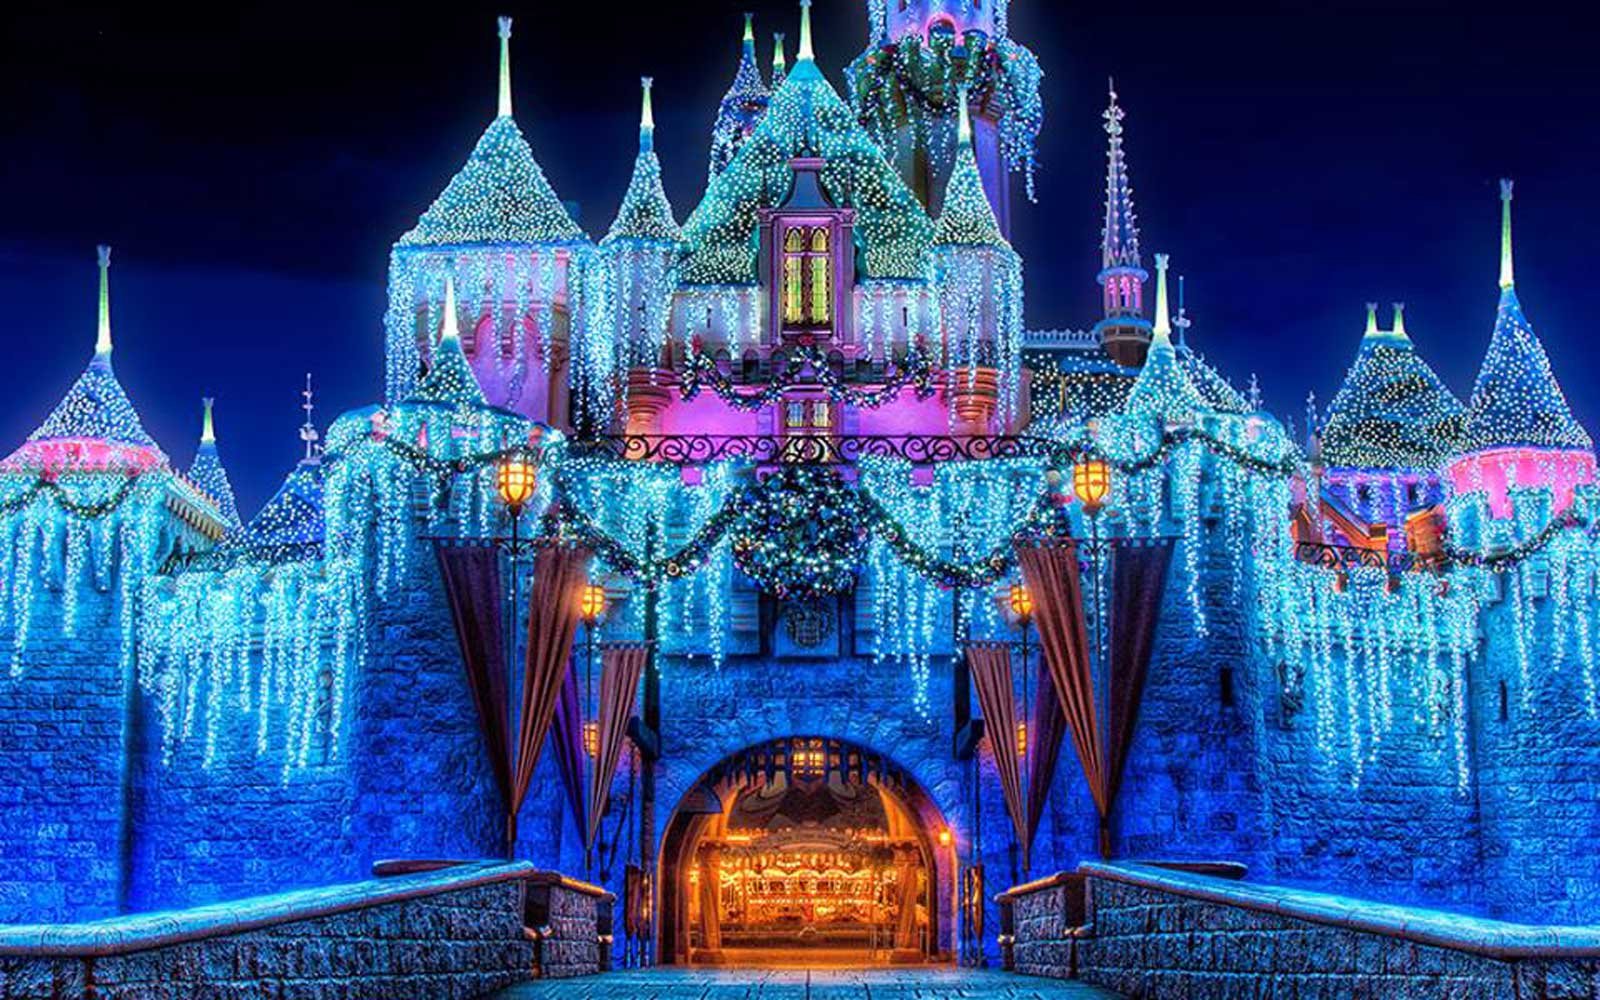 Which Chill Disney Princess Are You? Disneyland christmas